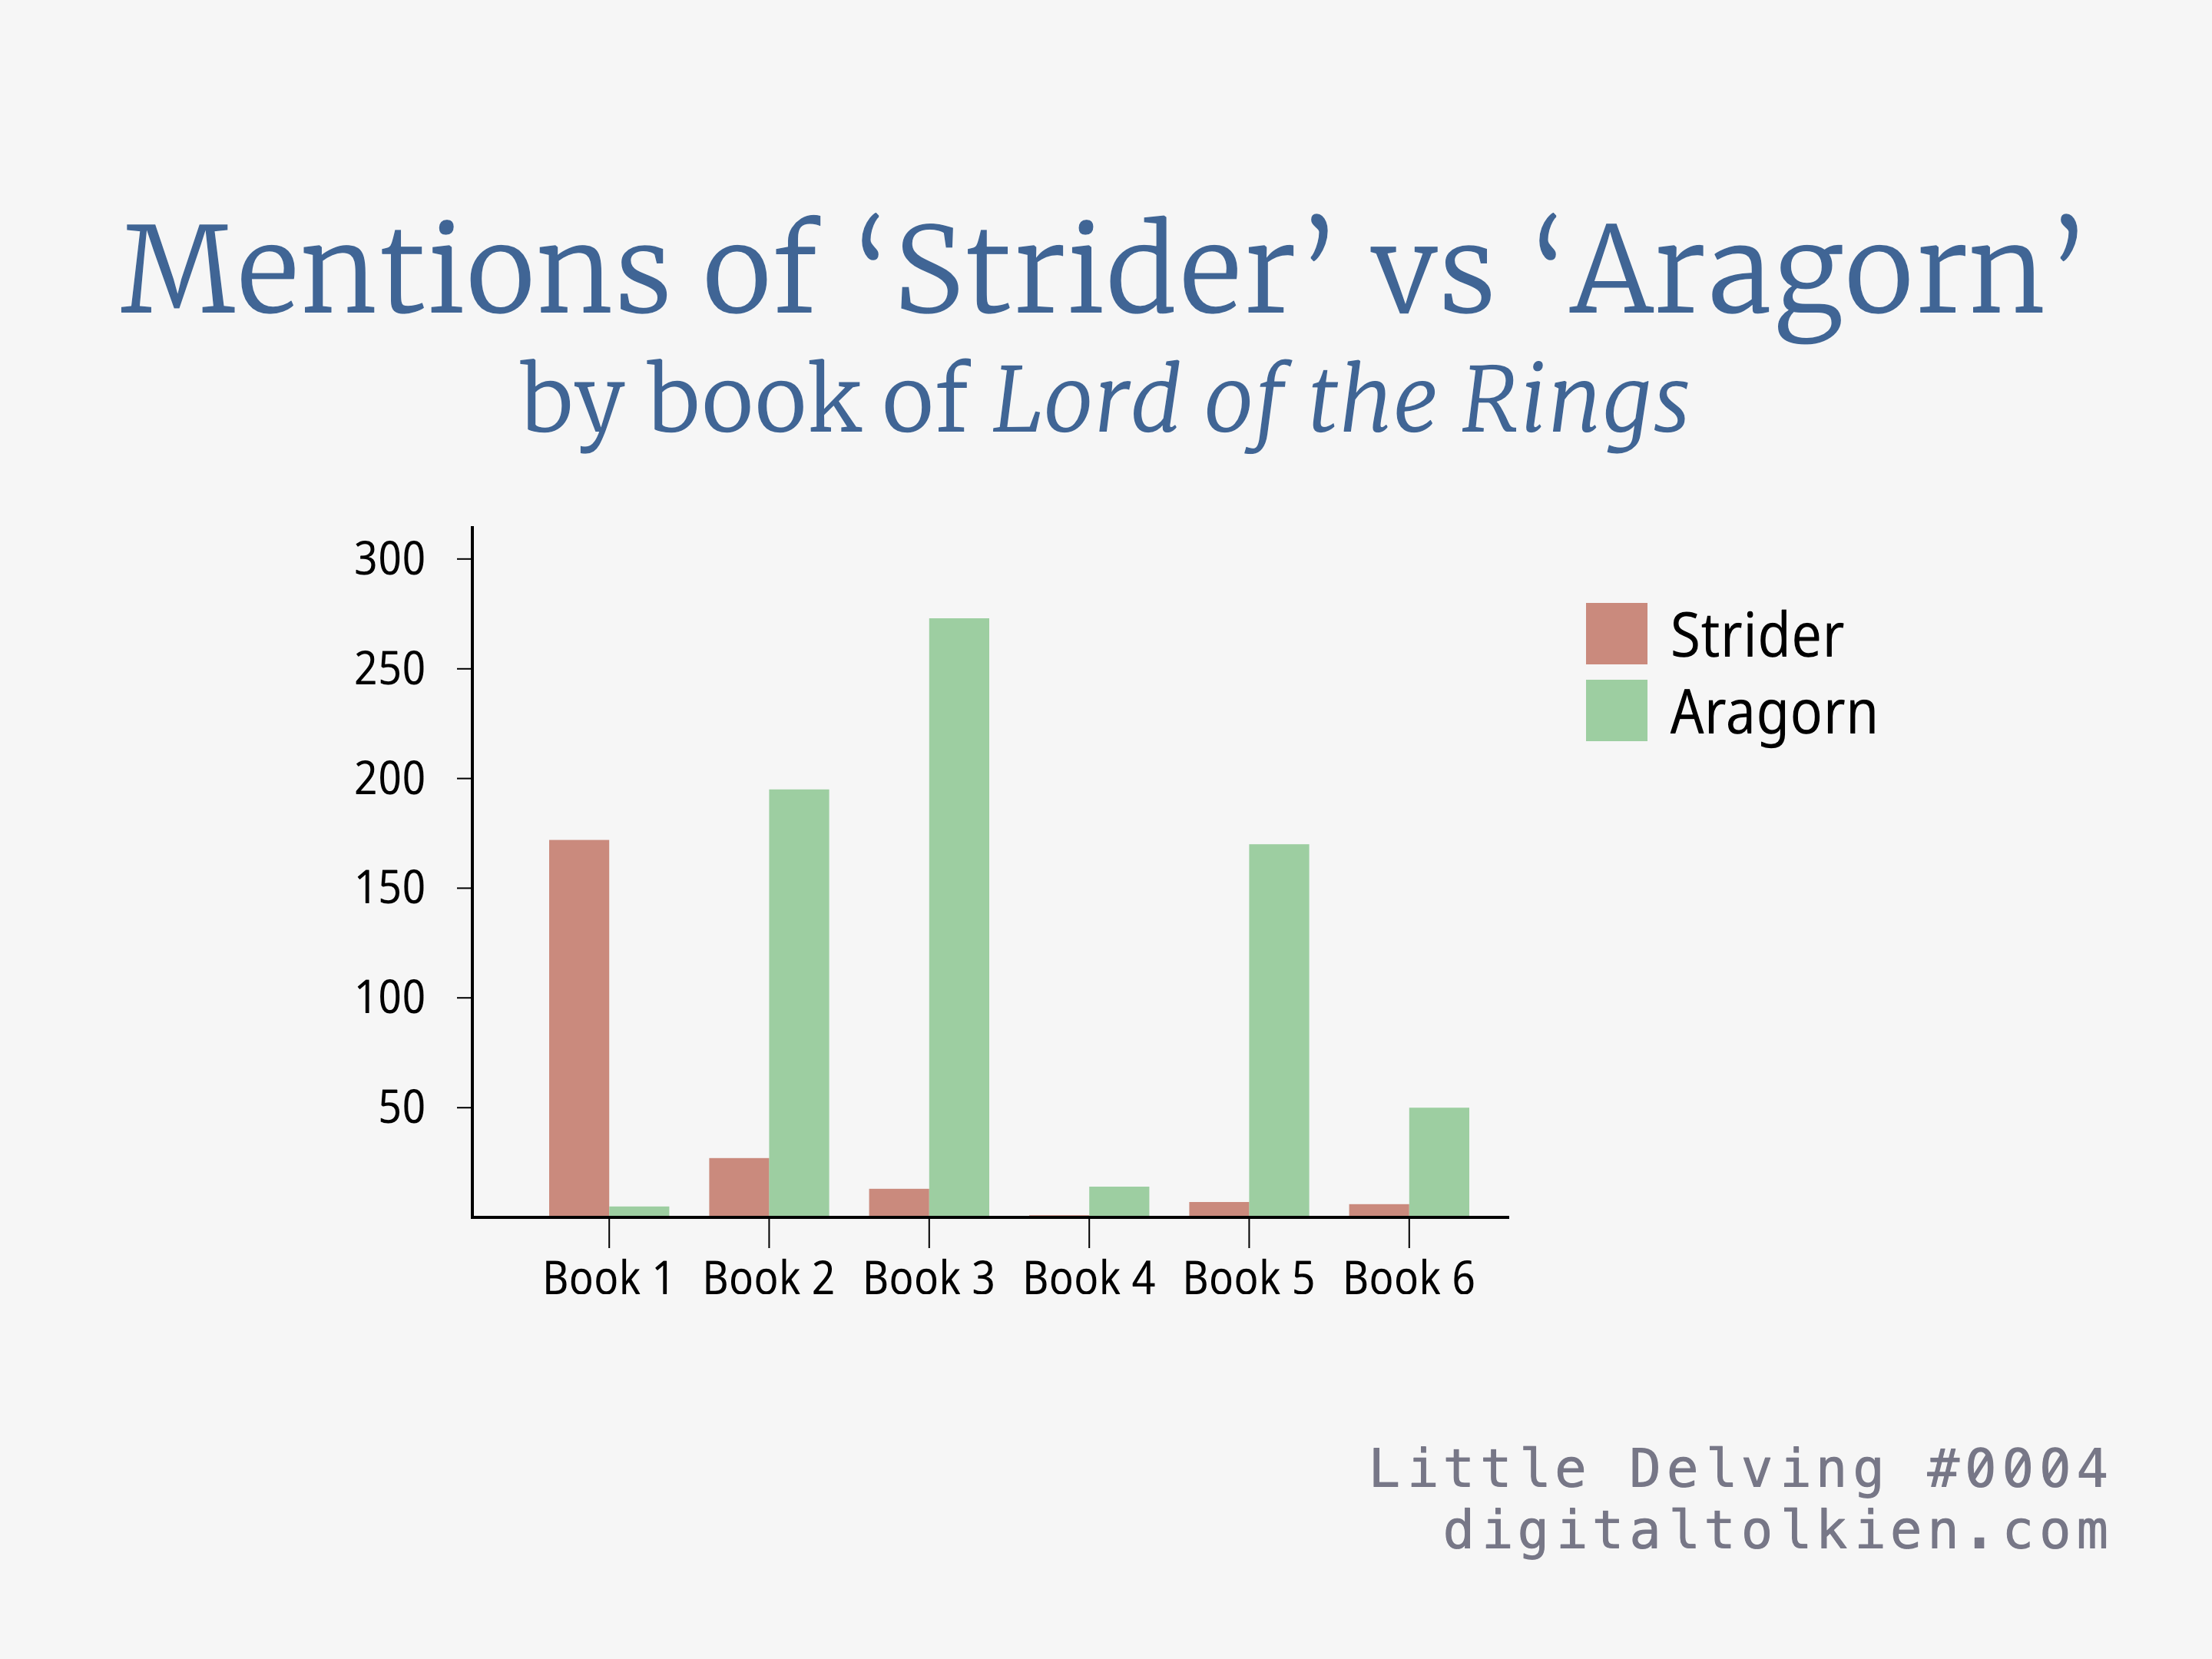 Mentions of ‘Strider’ vs ‘Aragorn’ by book of Lord of the Rings
        Bar chart
        Strider is far more frequent in book 1.
        Aragorn is more frequent in books 2, 3, 5 and, to a lesser extent, 6.
        Little Delving #0004
        digitaltolkien.com